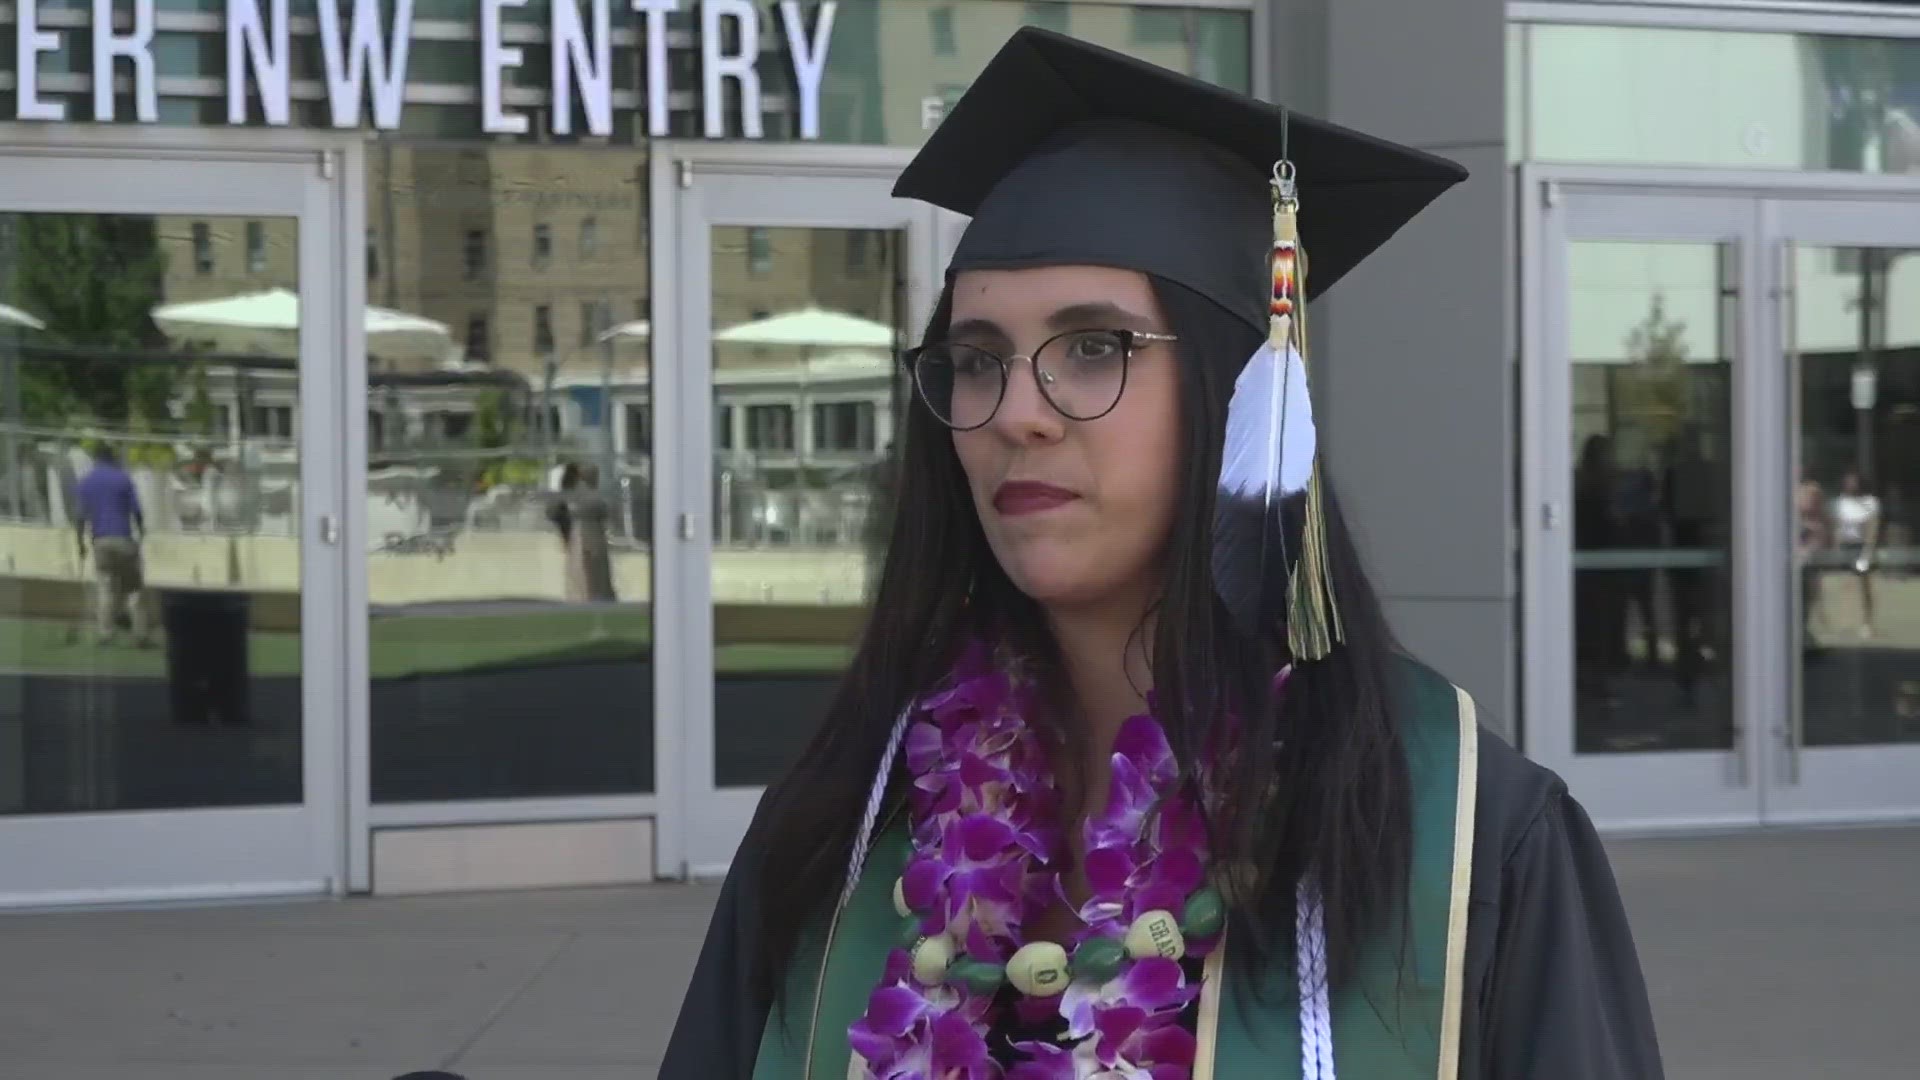 Students graduating from Sacramento State University spoke to ABC10 about what their accomplishments meant for them.